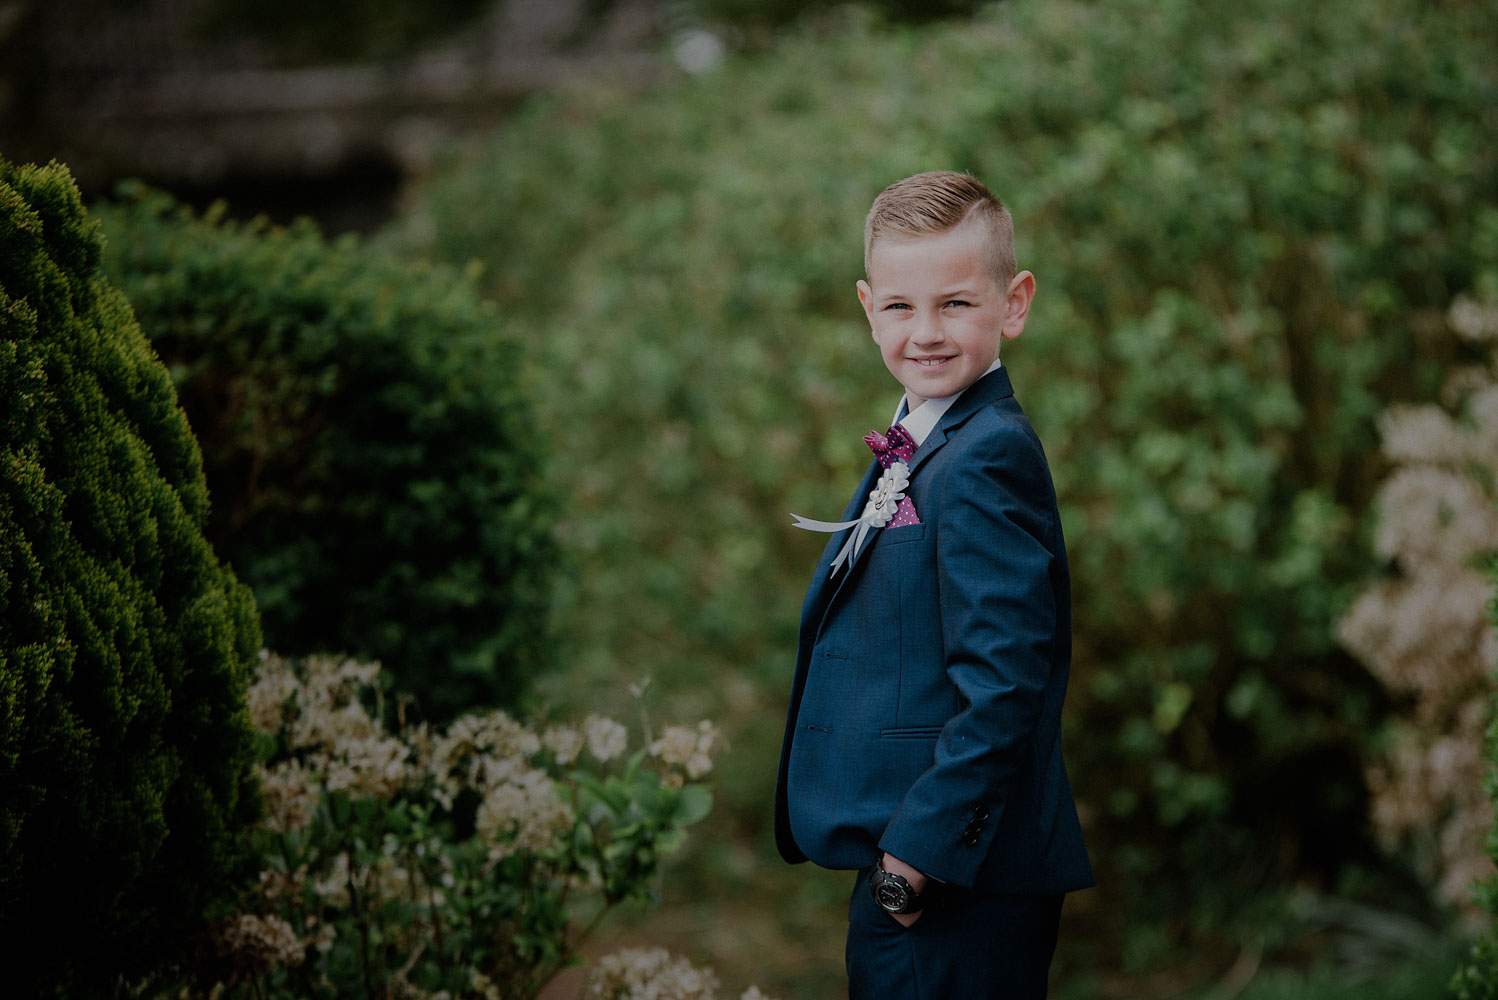 Jakub and his Communion Day 05.05.18